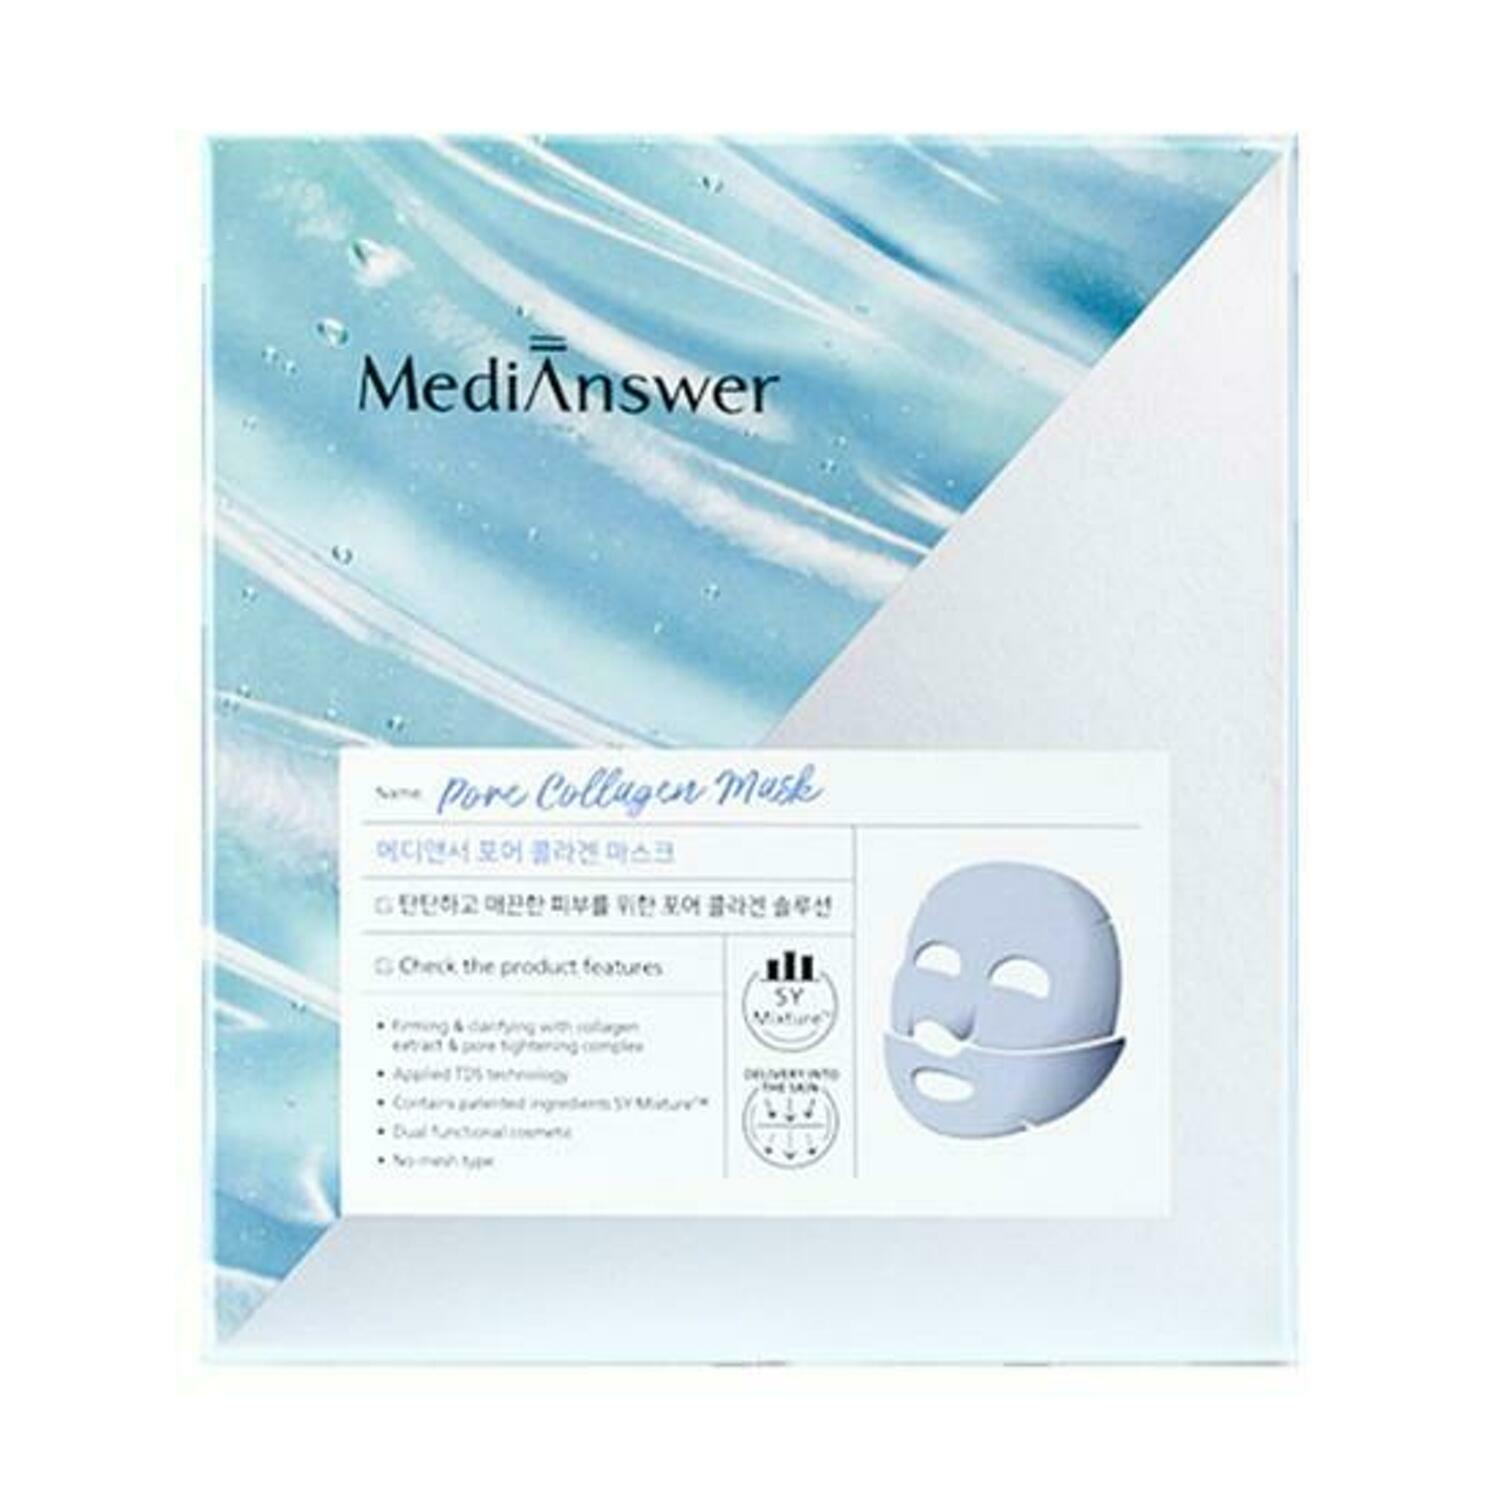 About Me MediAnswer Pore Collagen Mask